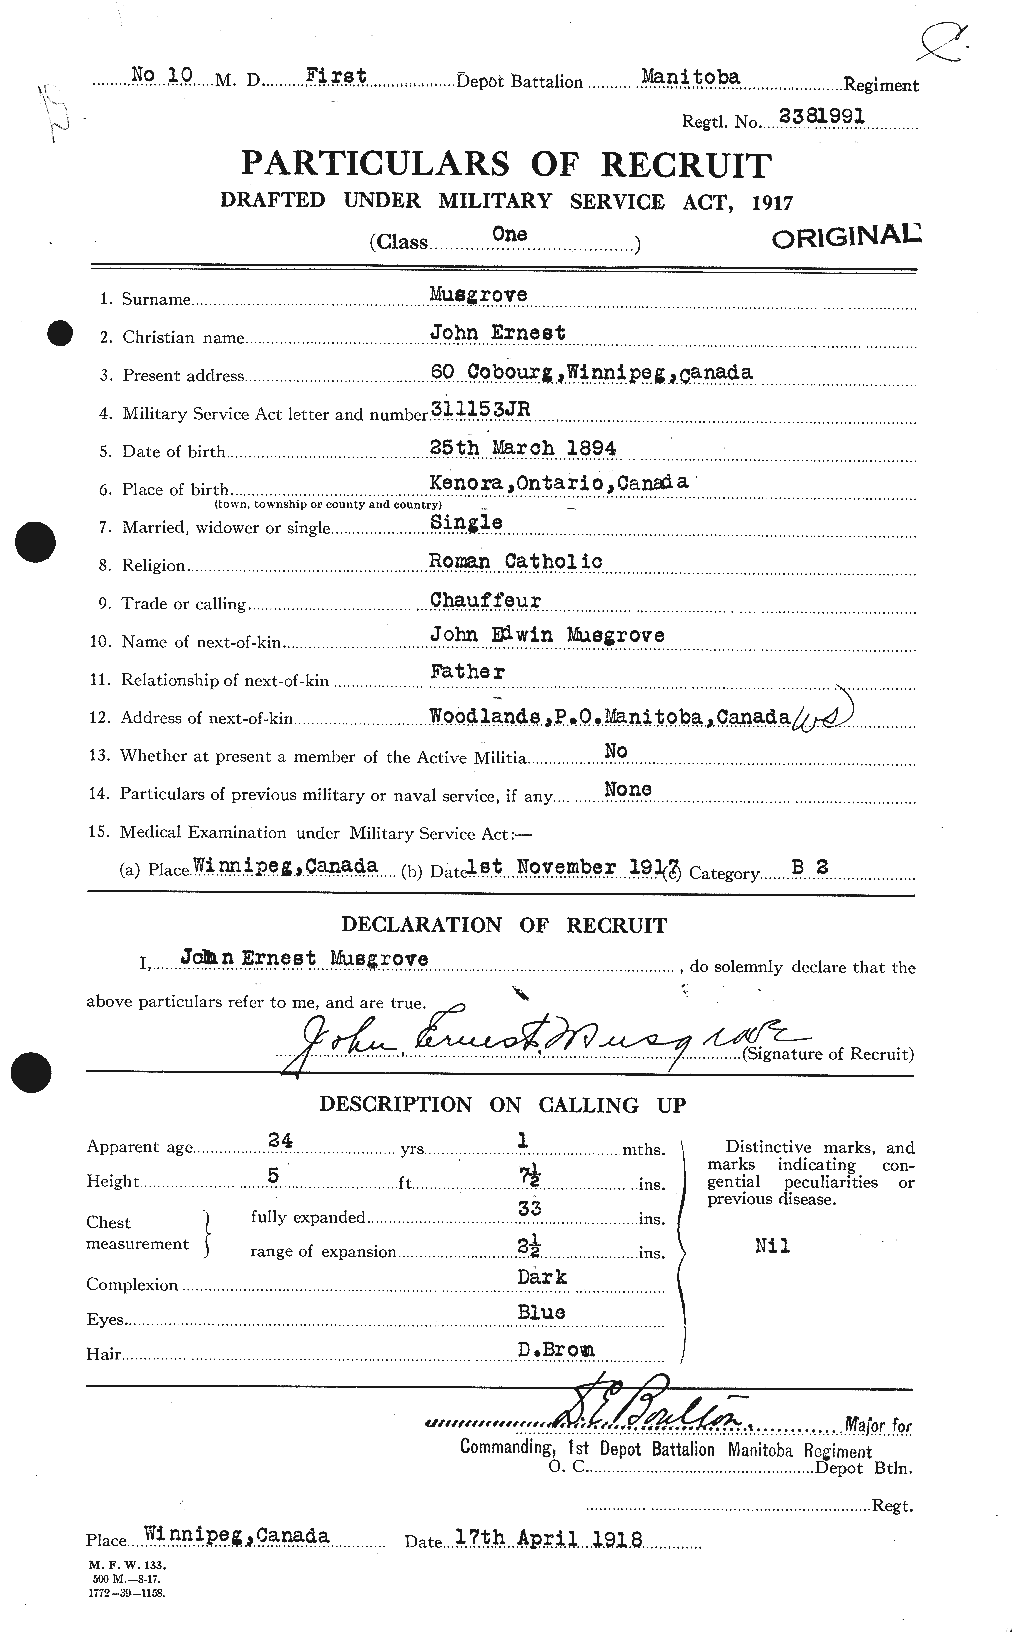 Personnel Records of the First World War - CEF 514964a